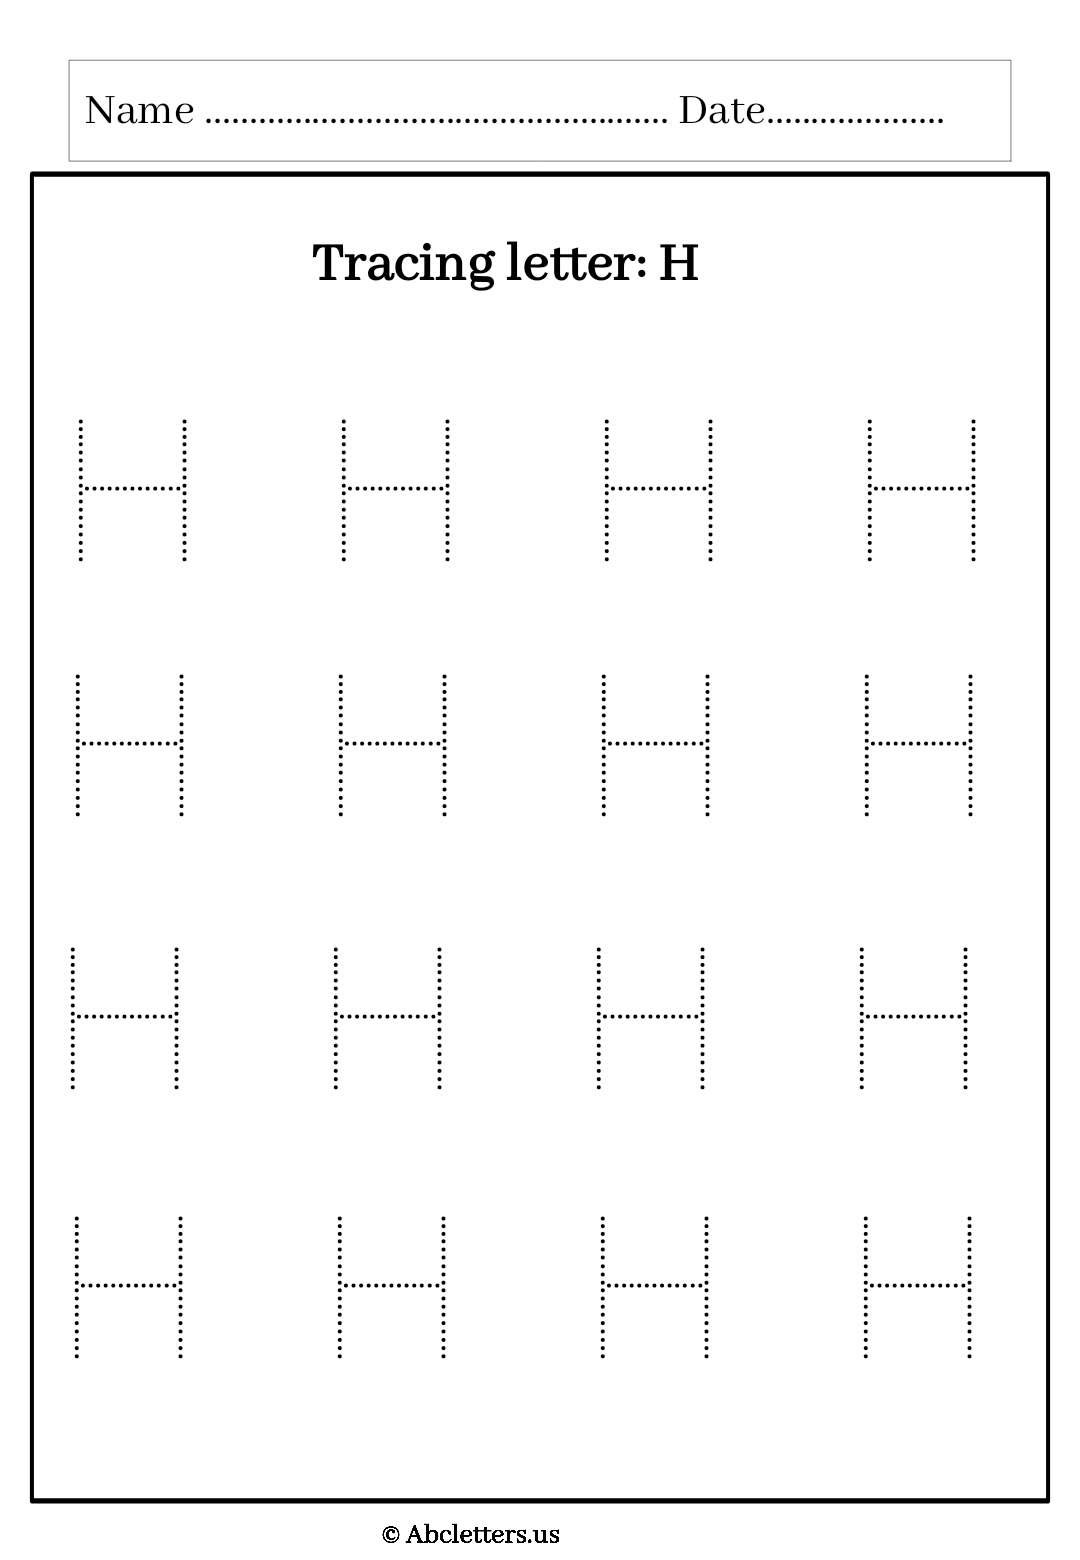 Tracing letter uppercase H